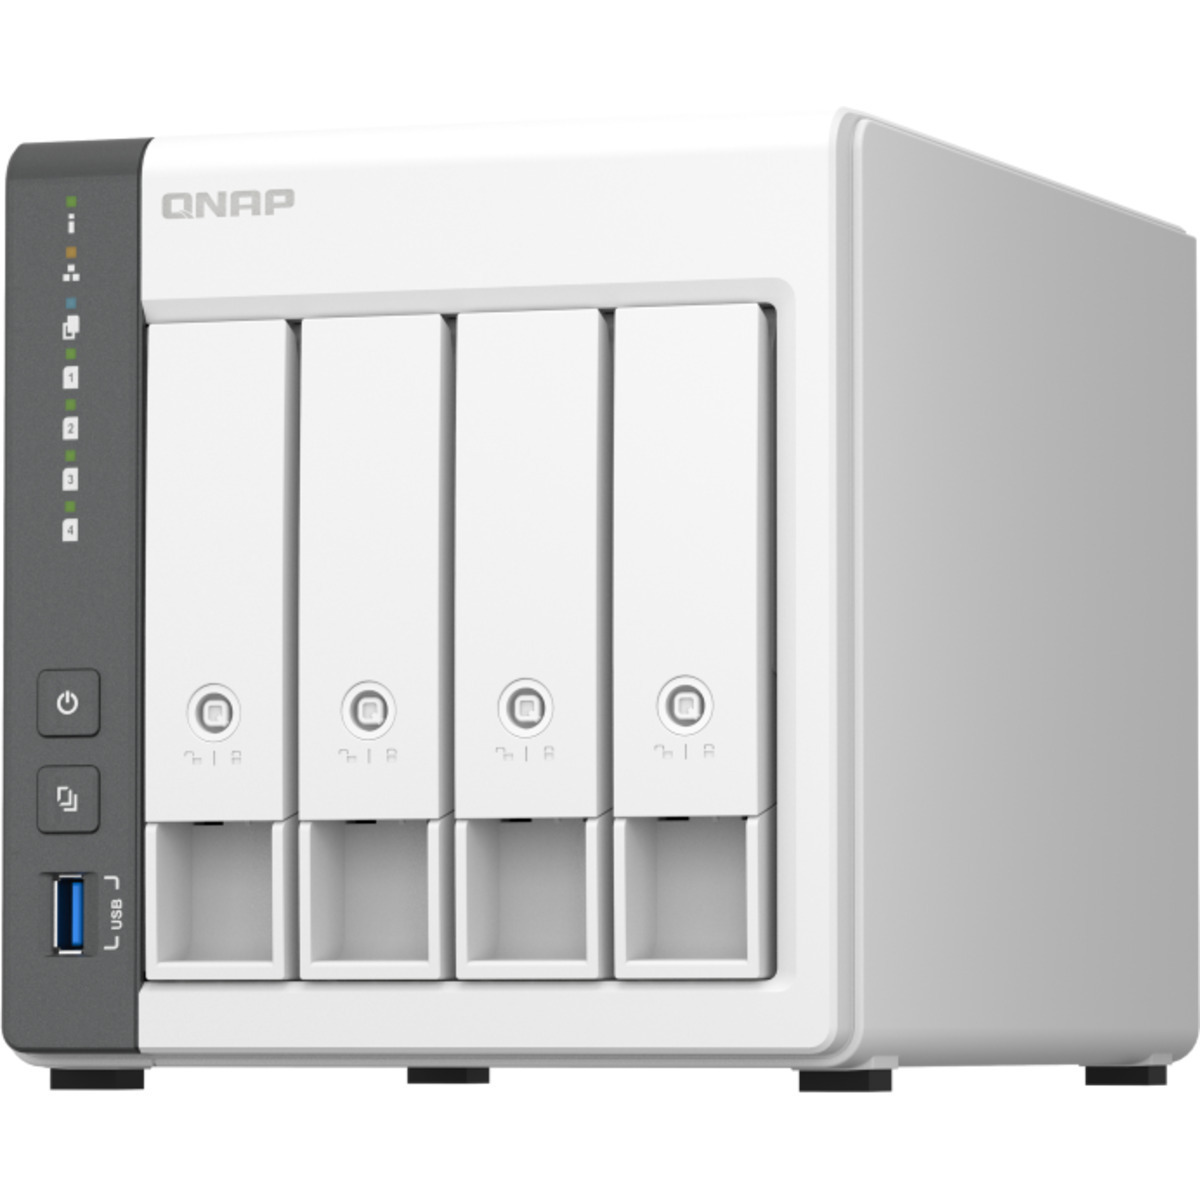 QNAP TS-433 72tb 4-Bay Desktop Personal / Basic Home / Small Office NAS - Network Attached Storage Device 4x18tb Toshiba Enterprise Capacity MG09ACA18TE 3.5 7200rpm SATA 6Gb/s HDD ENTERPRISE Class Drives Installed - Burn-In Tested TS-433